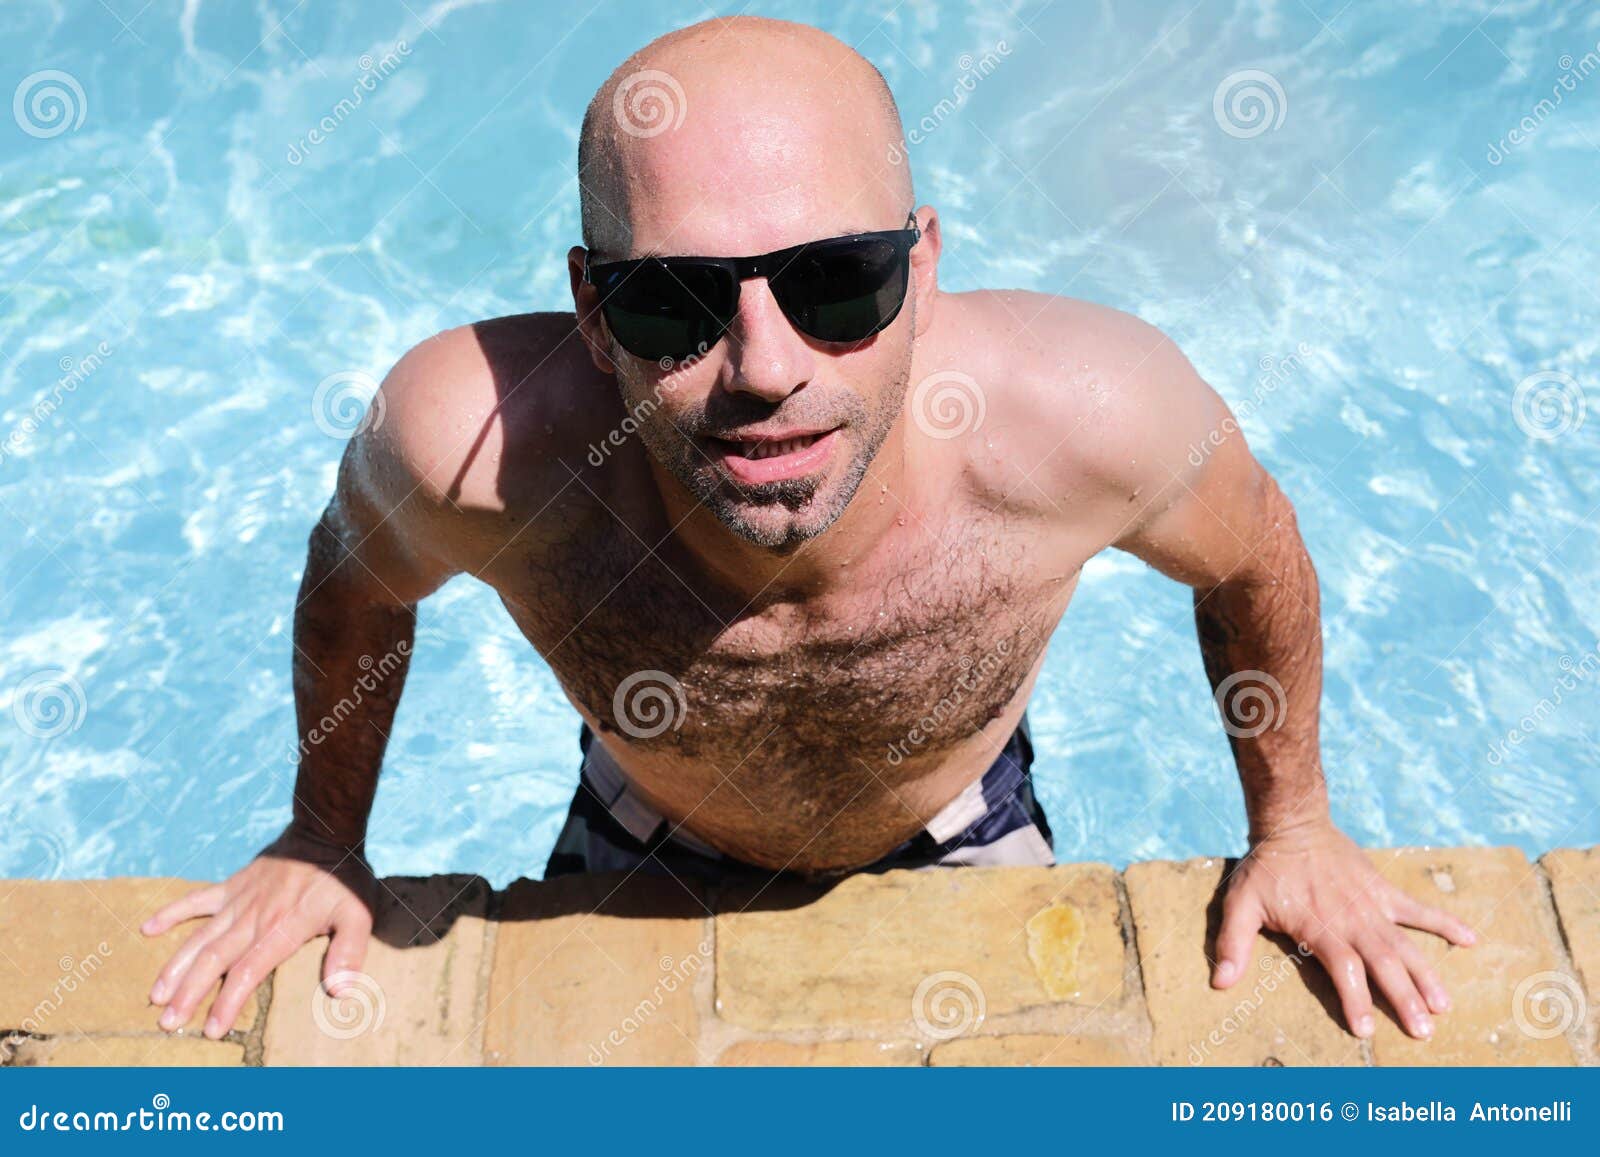 Handsome Guy Half Naked Cheerful Man Smiling Laughing In Blue Water